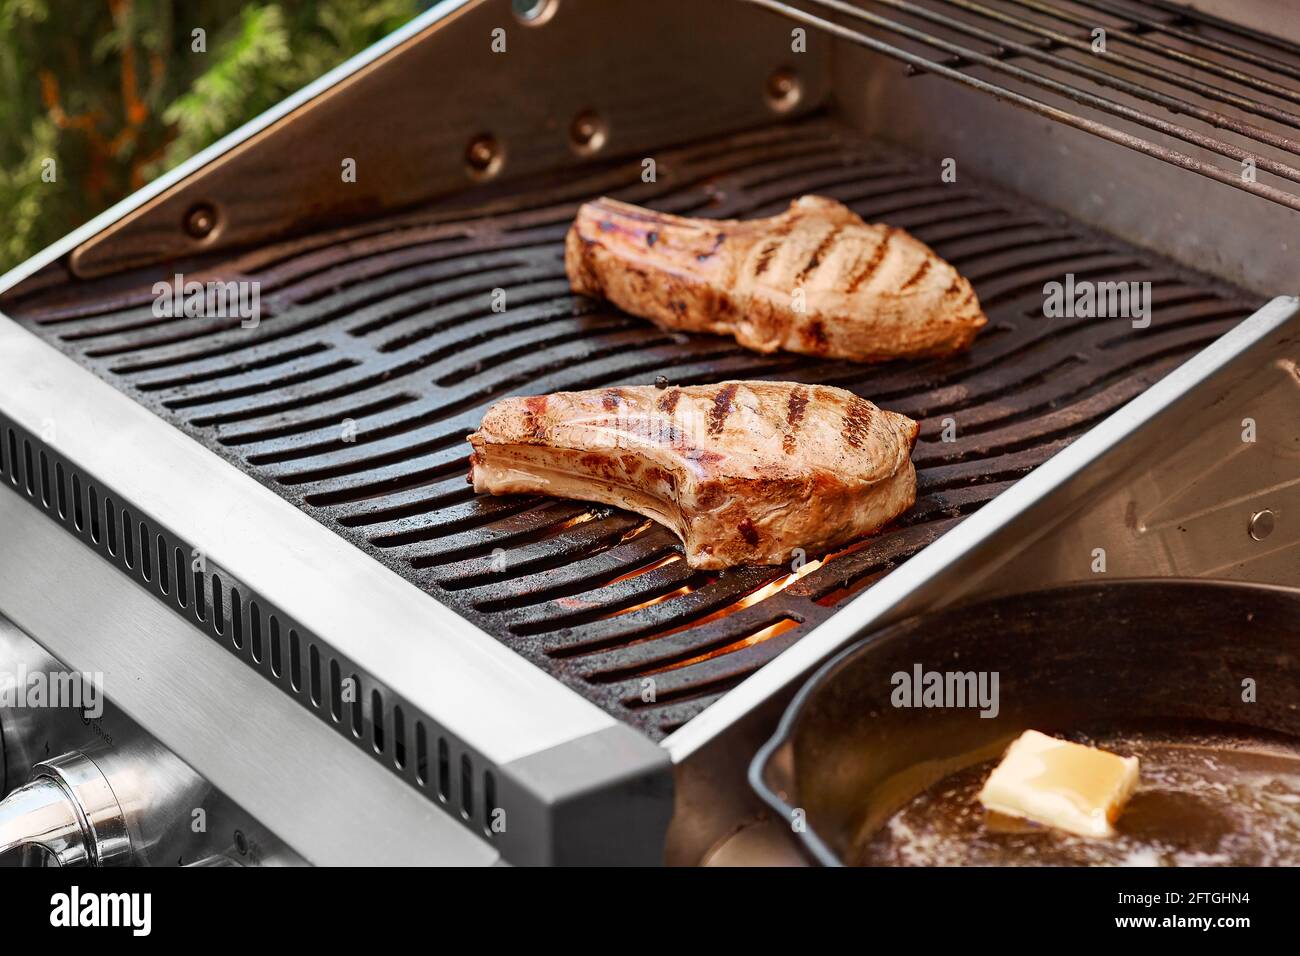 Maple Brined Pork Chops on Grill Stock Photo